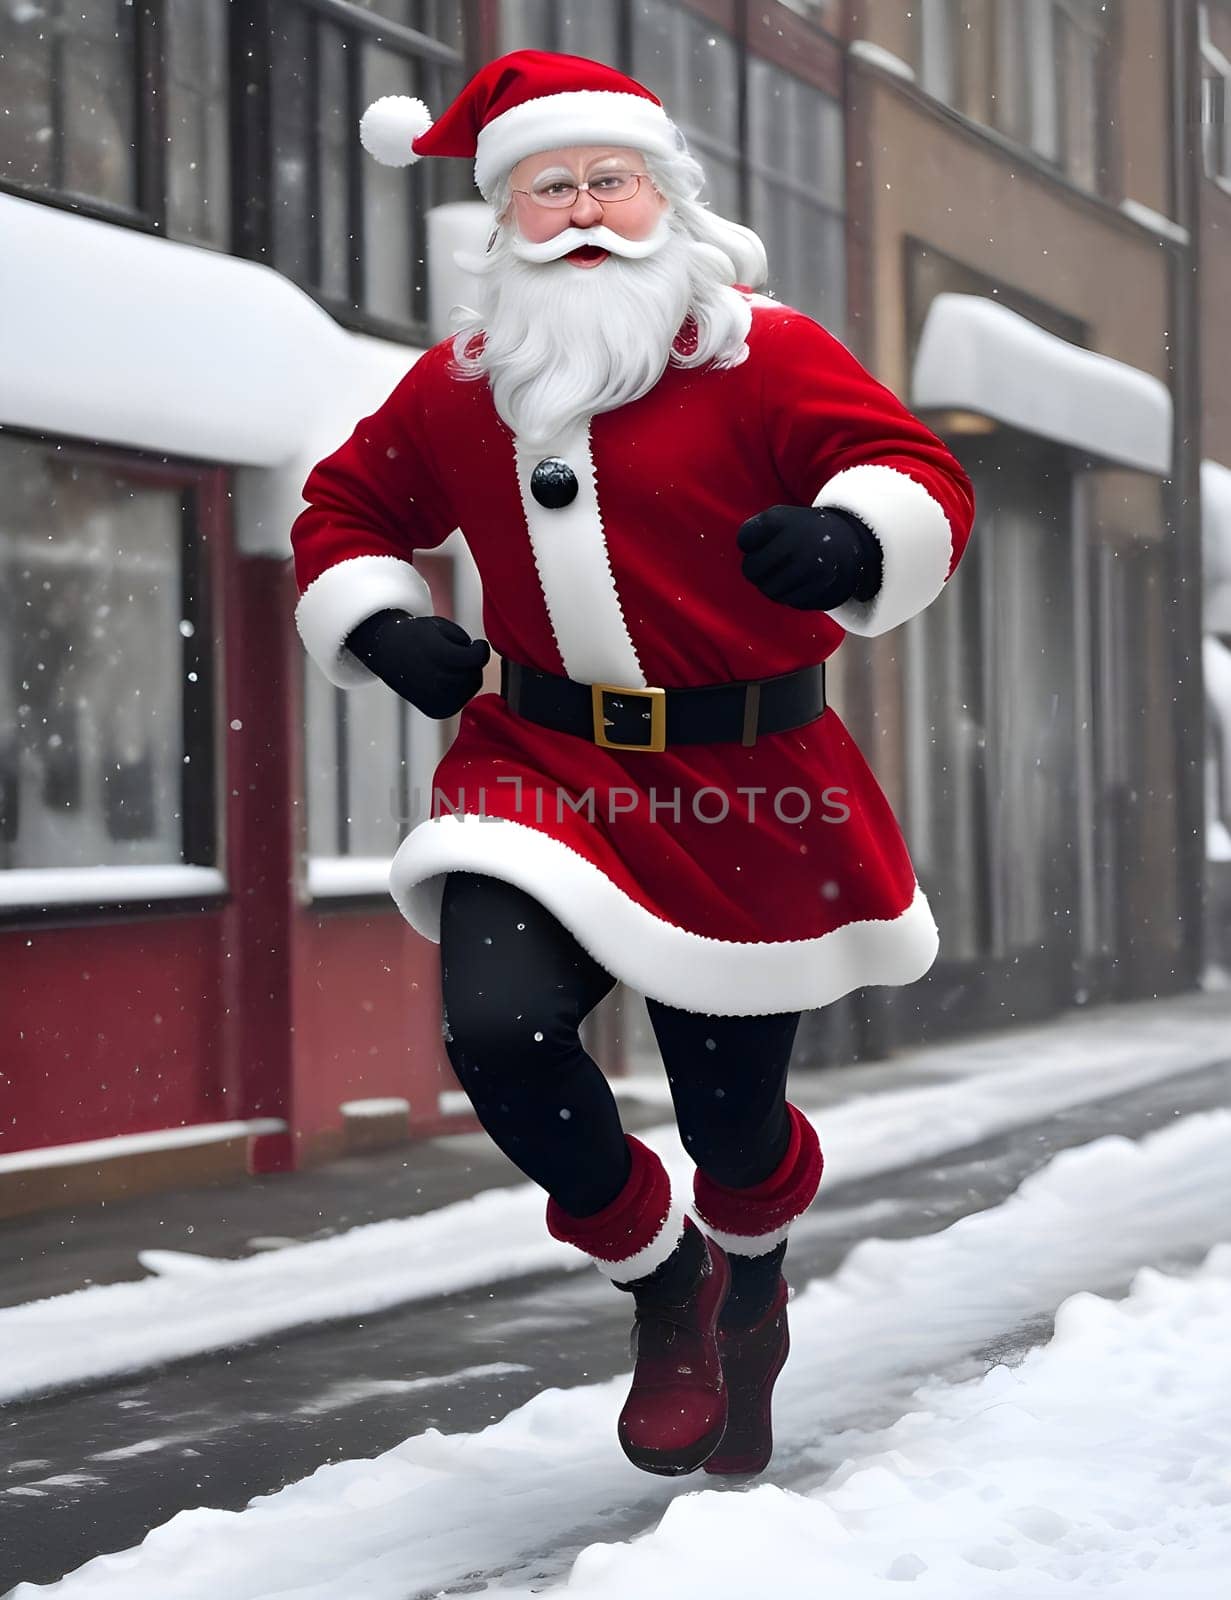 Santa claus goes step by step in the street by andre_dechapelle